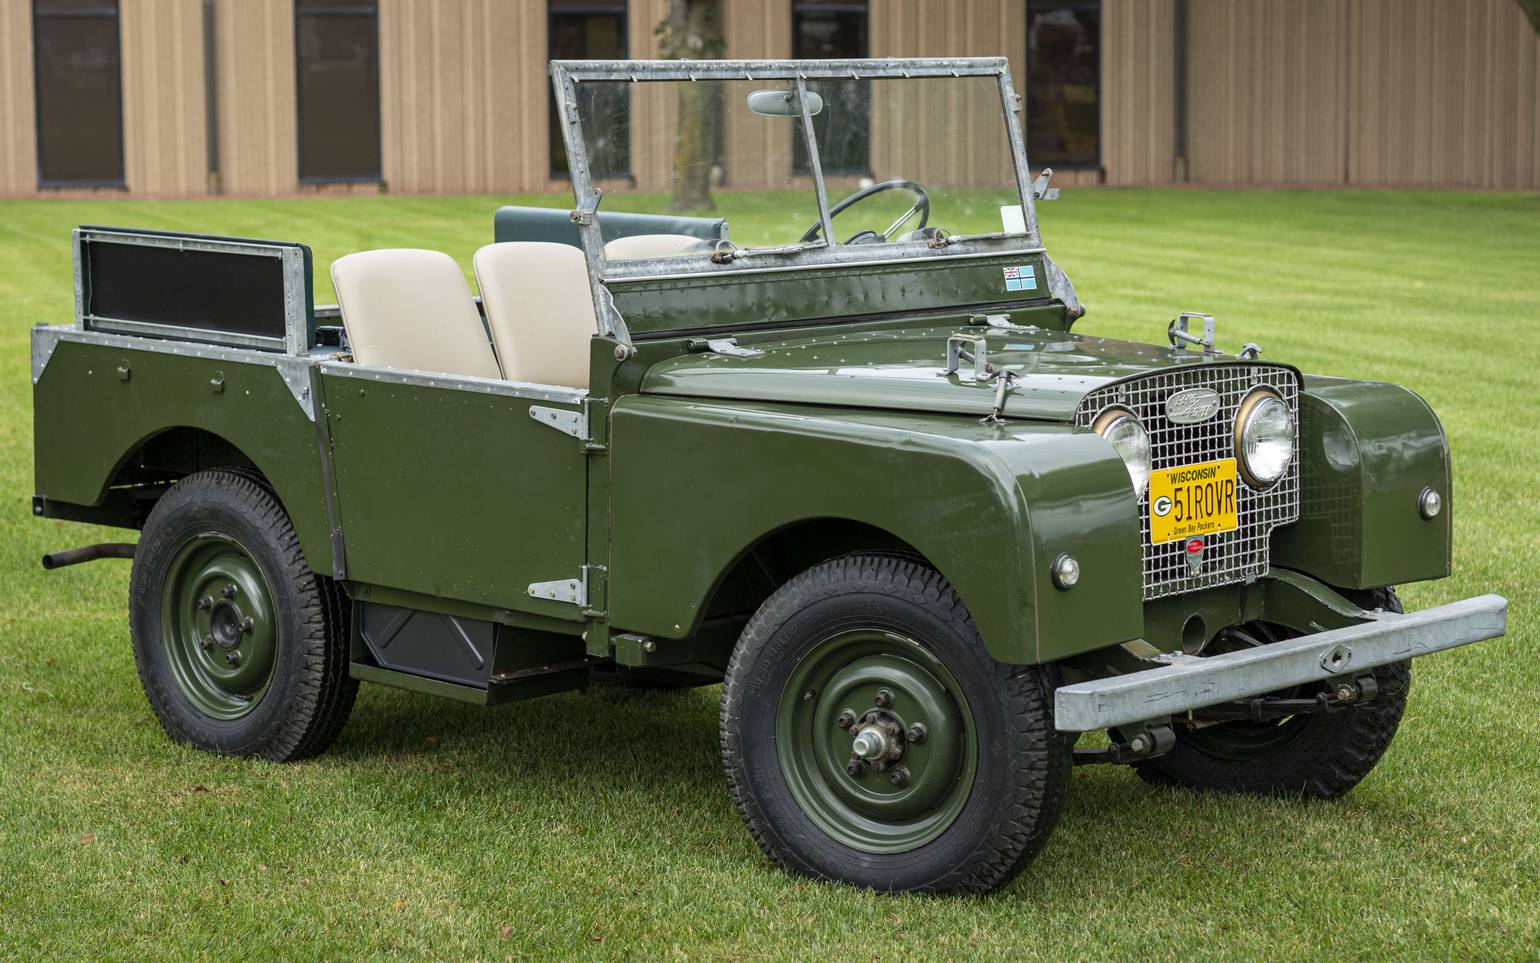 early-export-landie-1951-land-rover-series-i73280694-770-0@2X